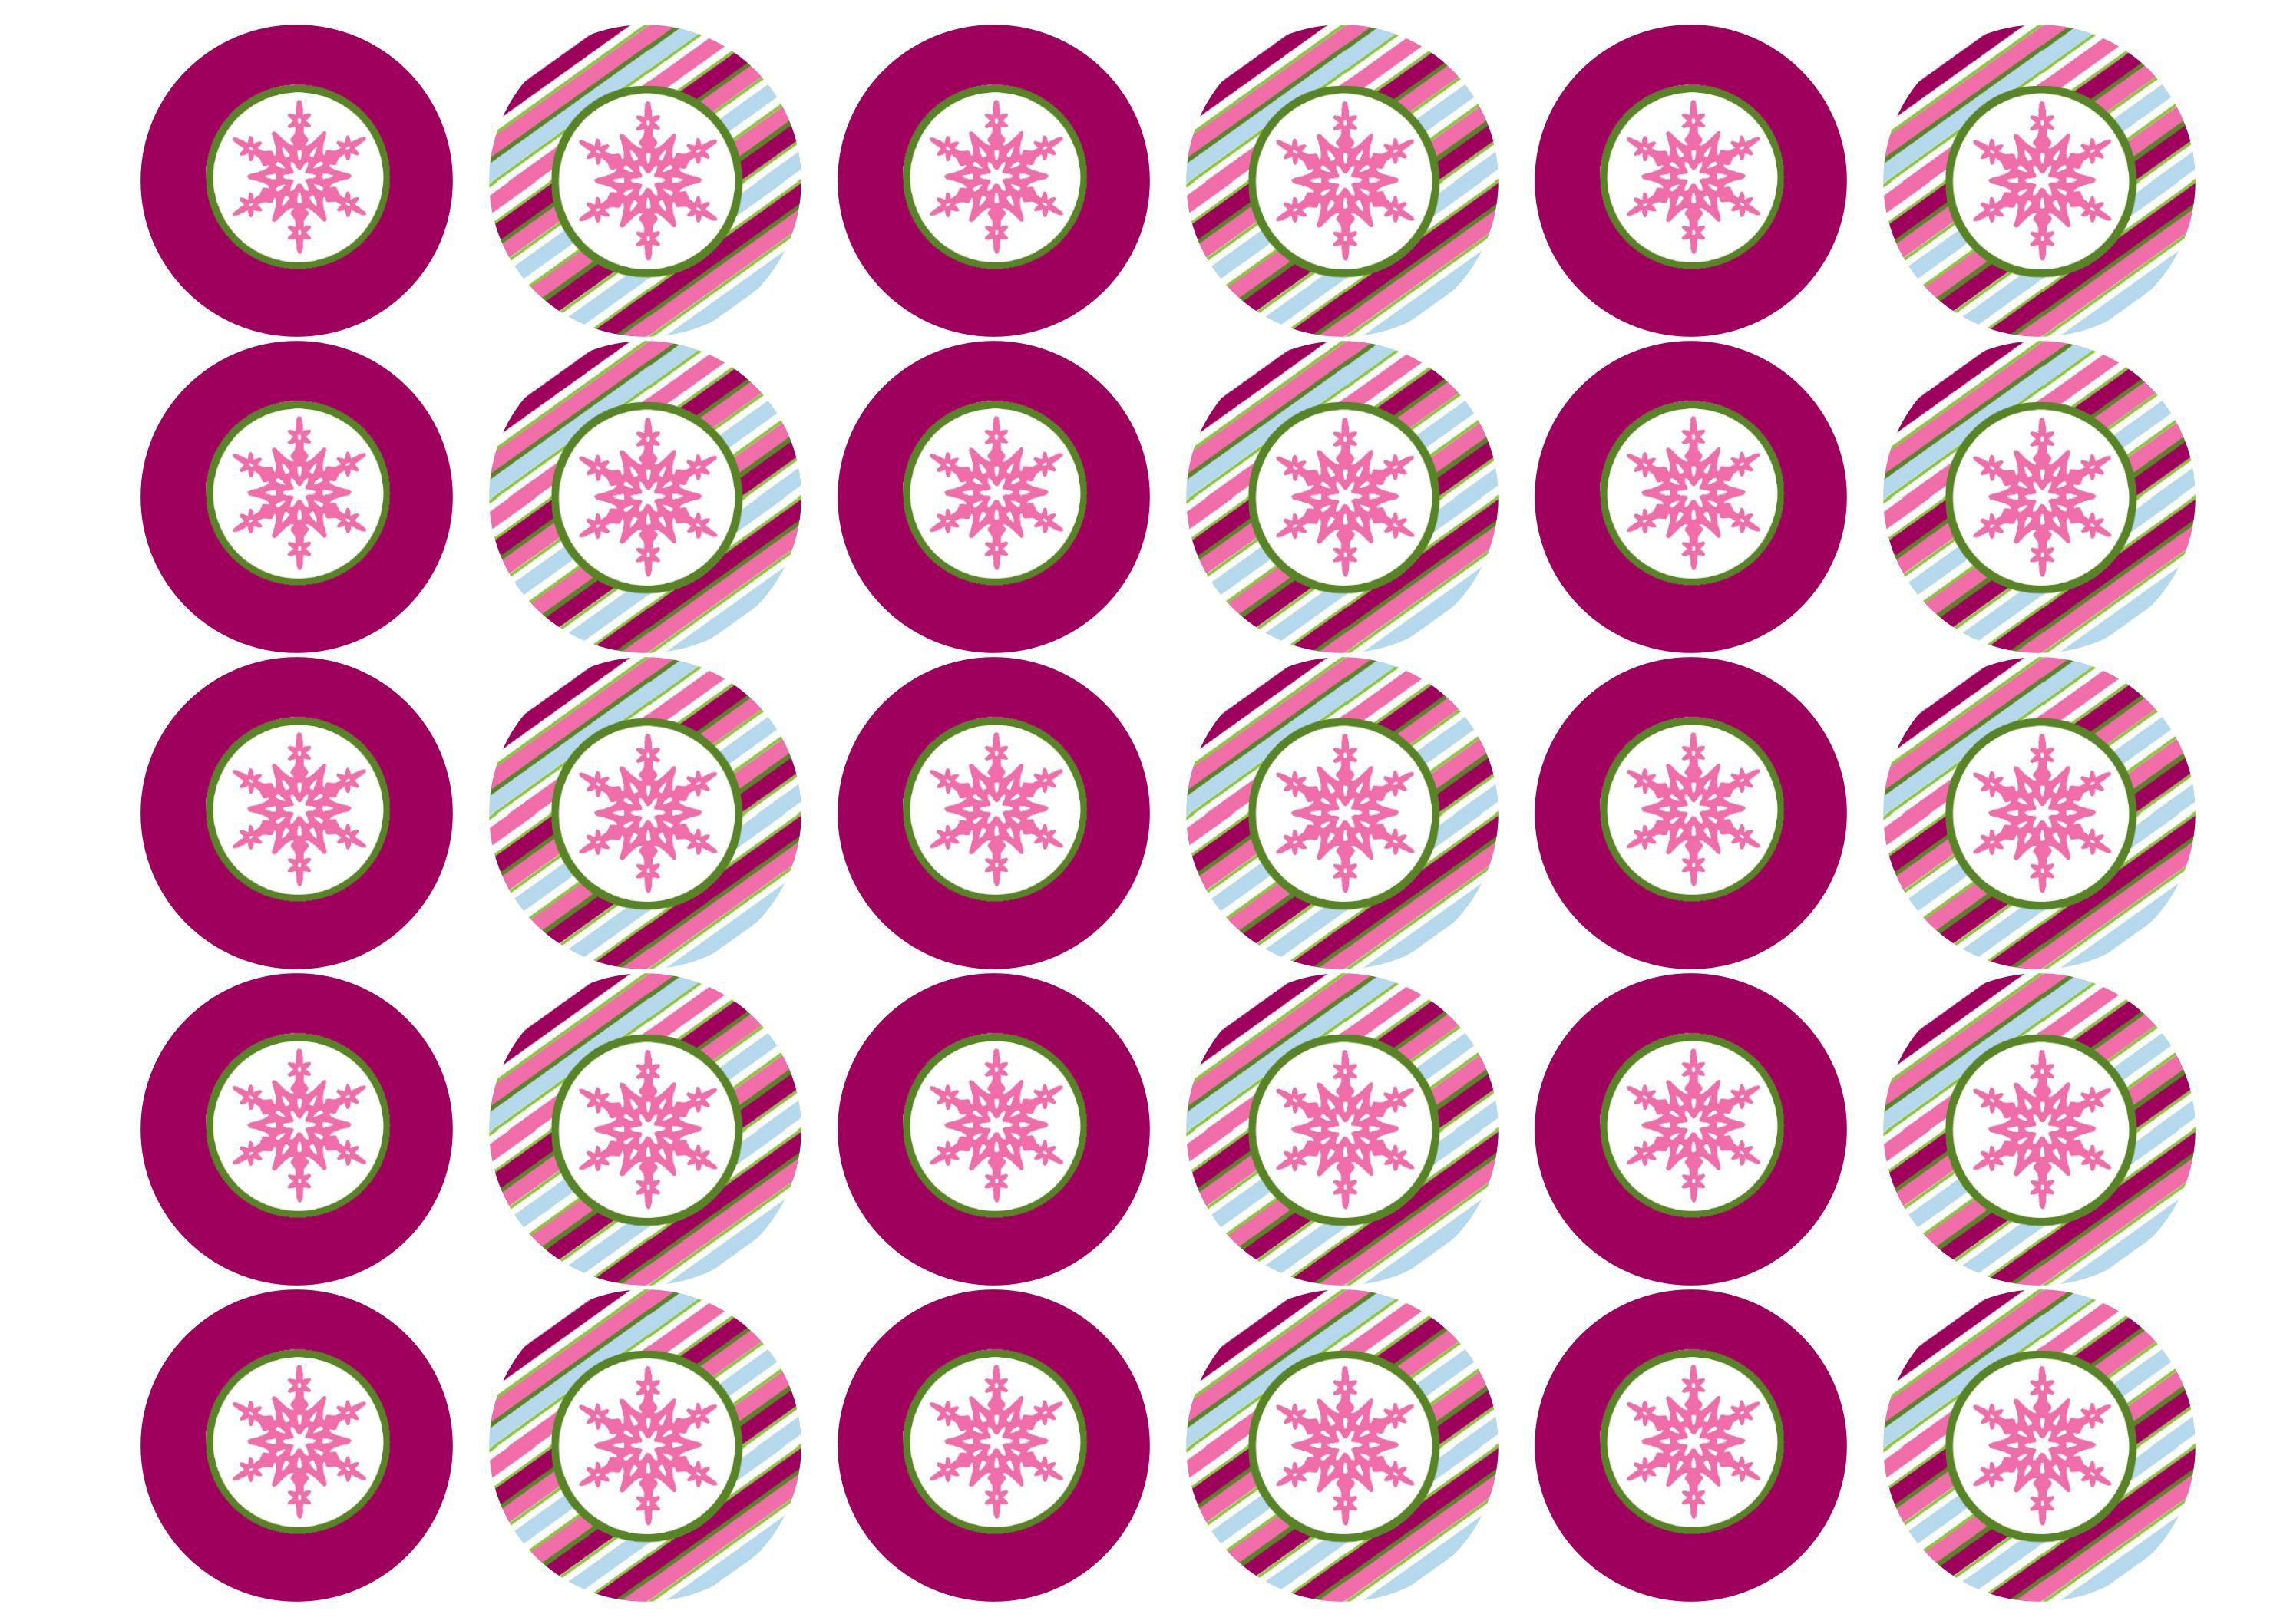 Printed Christmas cupcake toppers and cake toppers with pink snowflake images printed on rice paper or icing